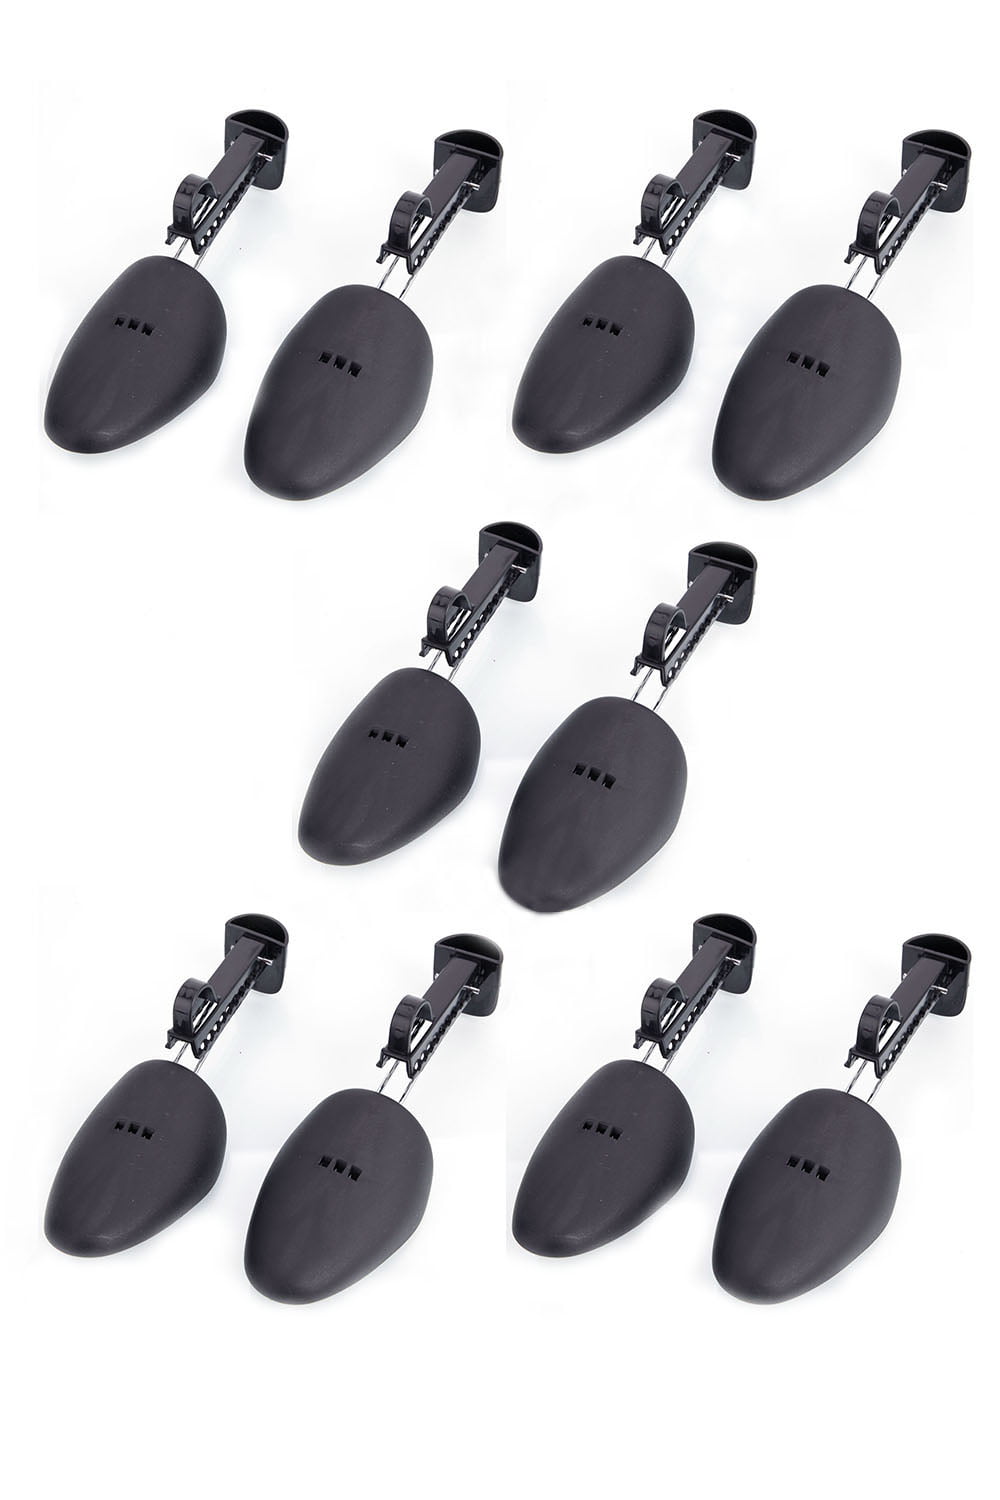 10X Pairs Of Men Plastic Shoe Trees Maintain Shapes Shoes Footwear Stretcher 